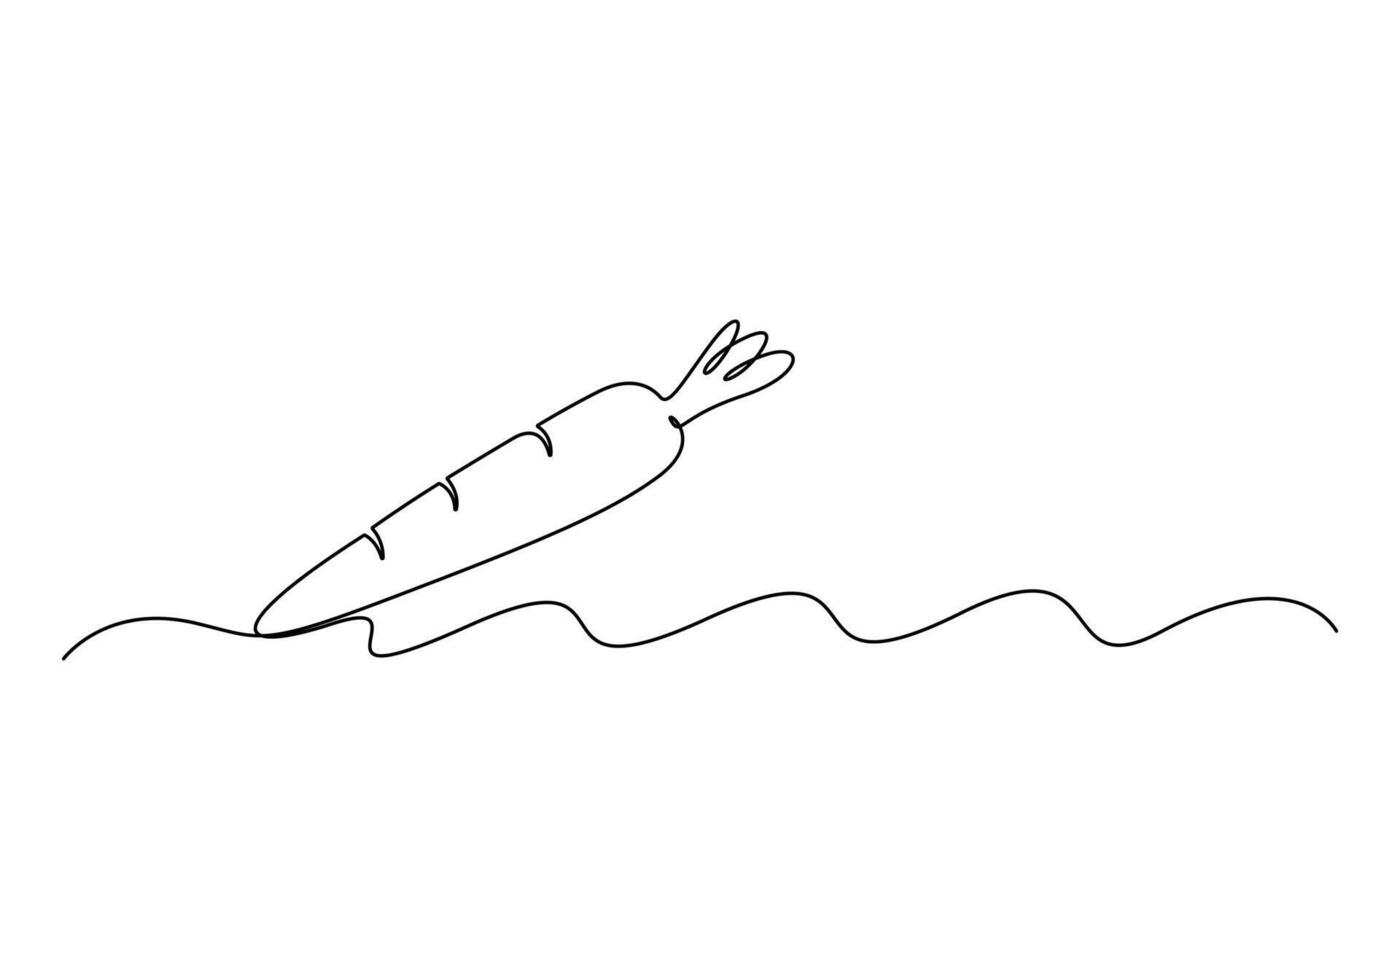 Carrot in one continuous line drawing of carrot vector illustration